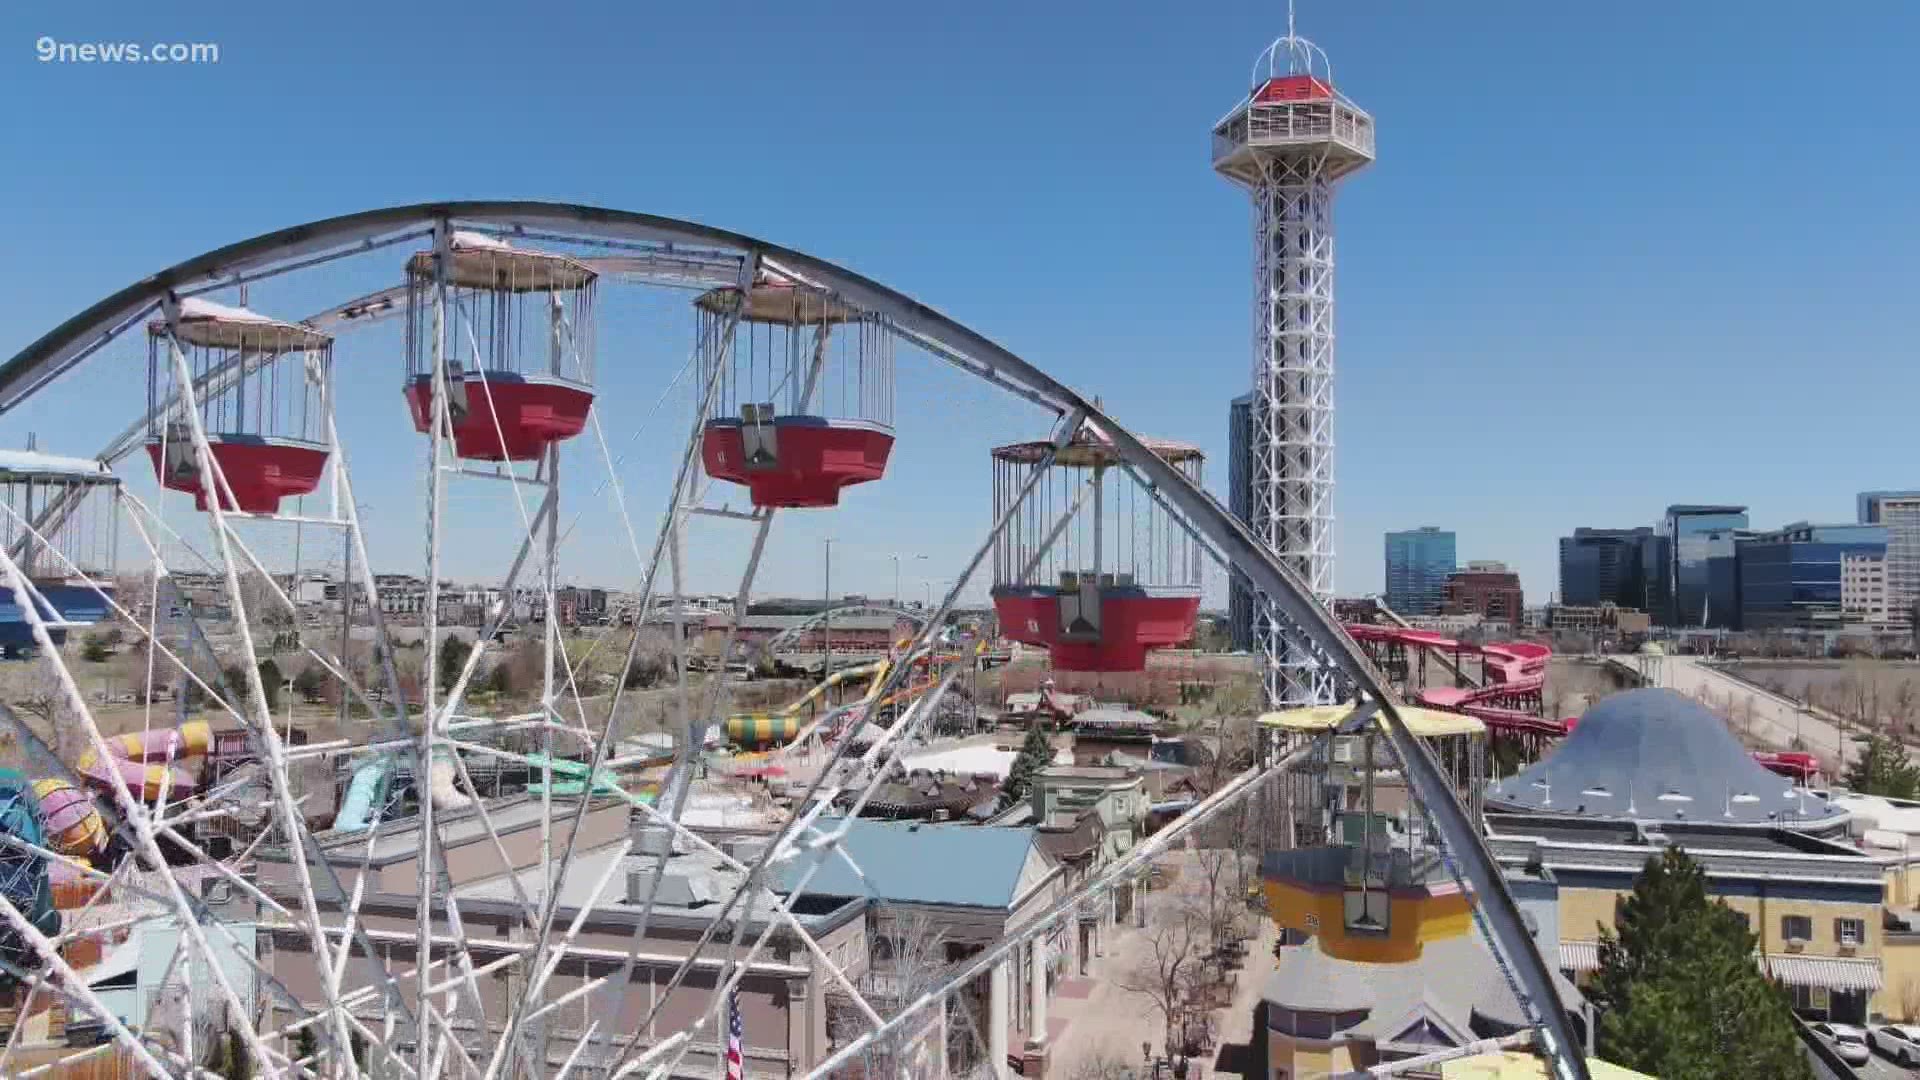 The amusement park will limit capacity to 43 percent equaling about 7,000 patrons.